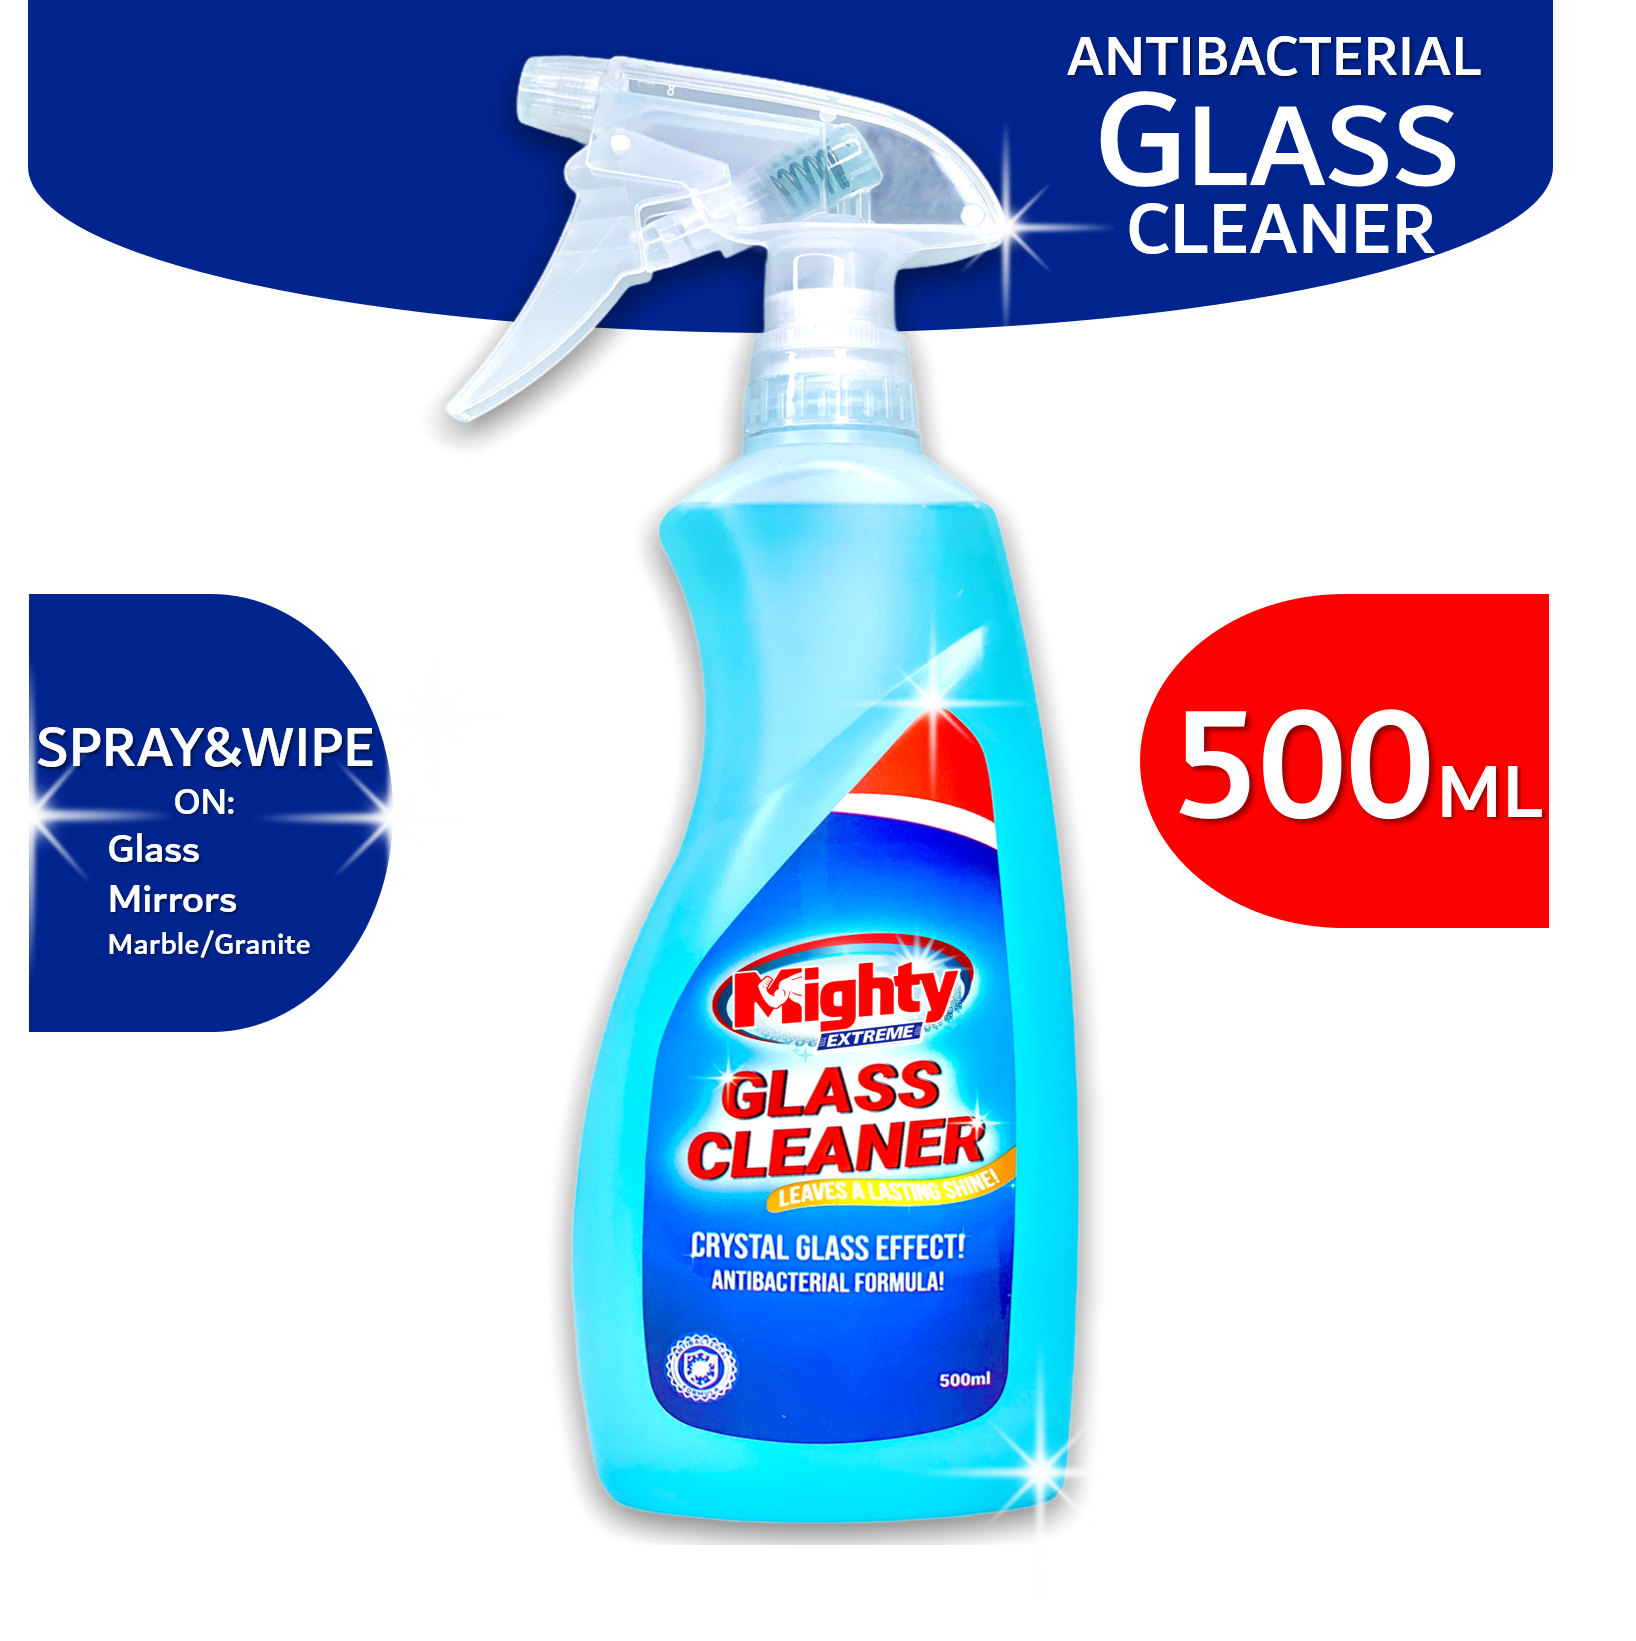 Mighty Glass Cleaner Antibacterial 500ml with SPRAY - GLASS CLEANER SPRAY  500ml